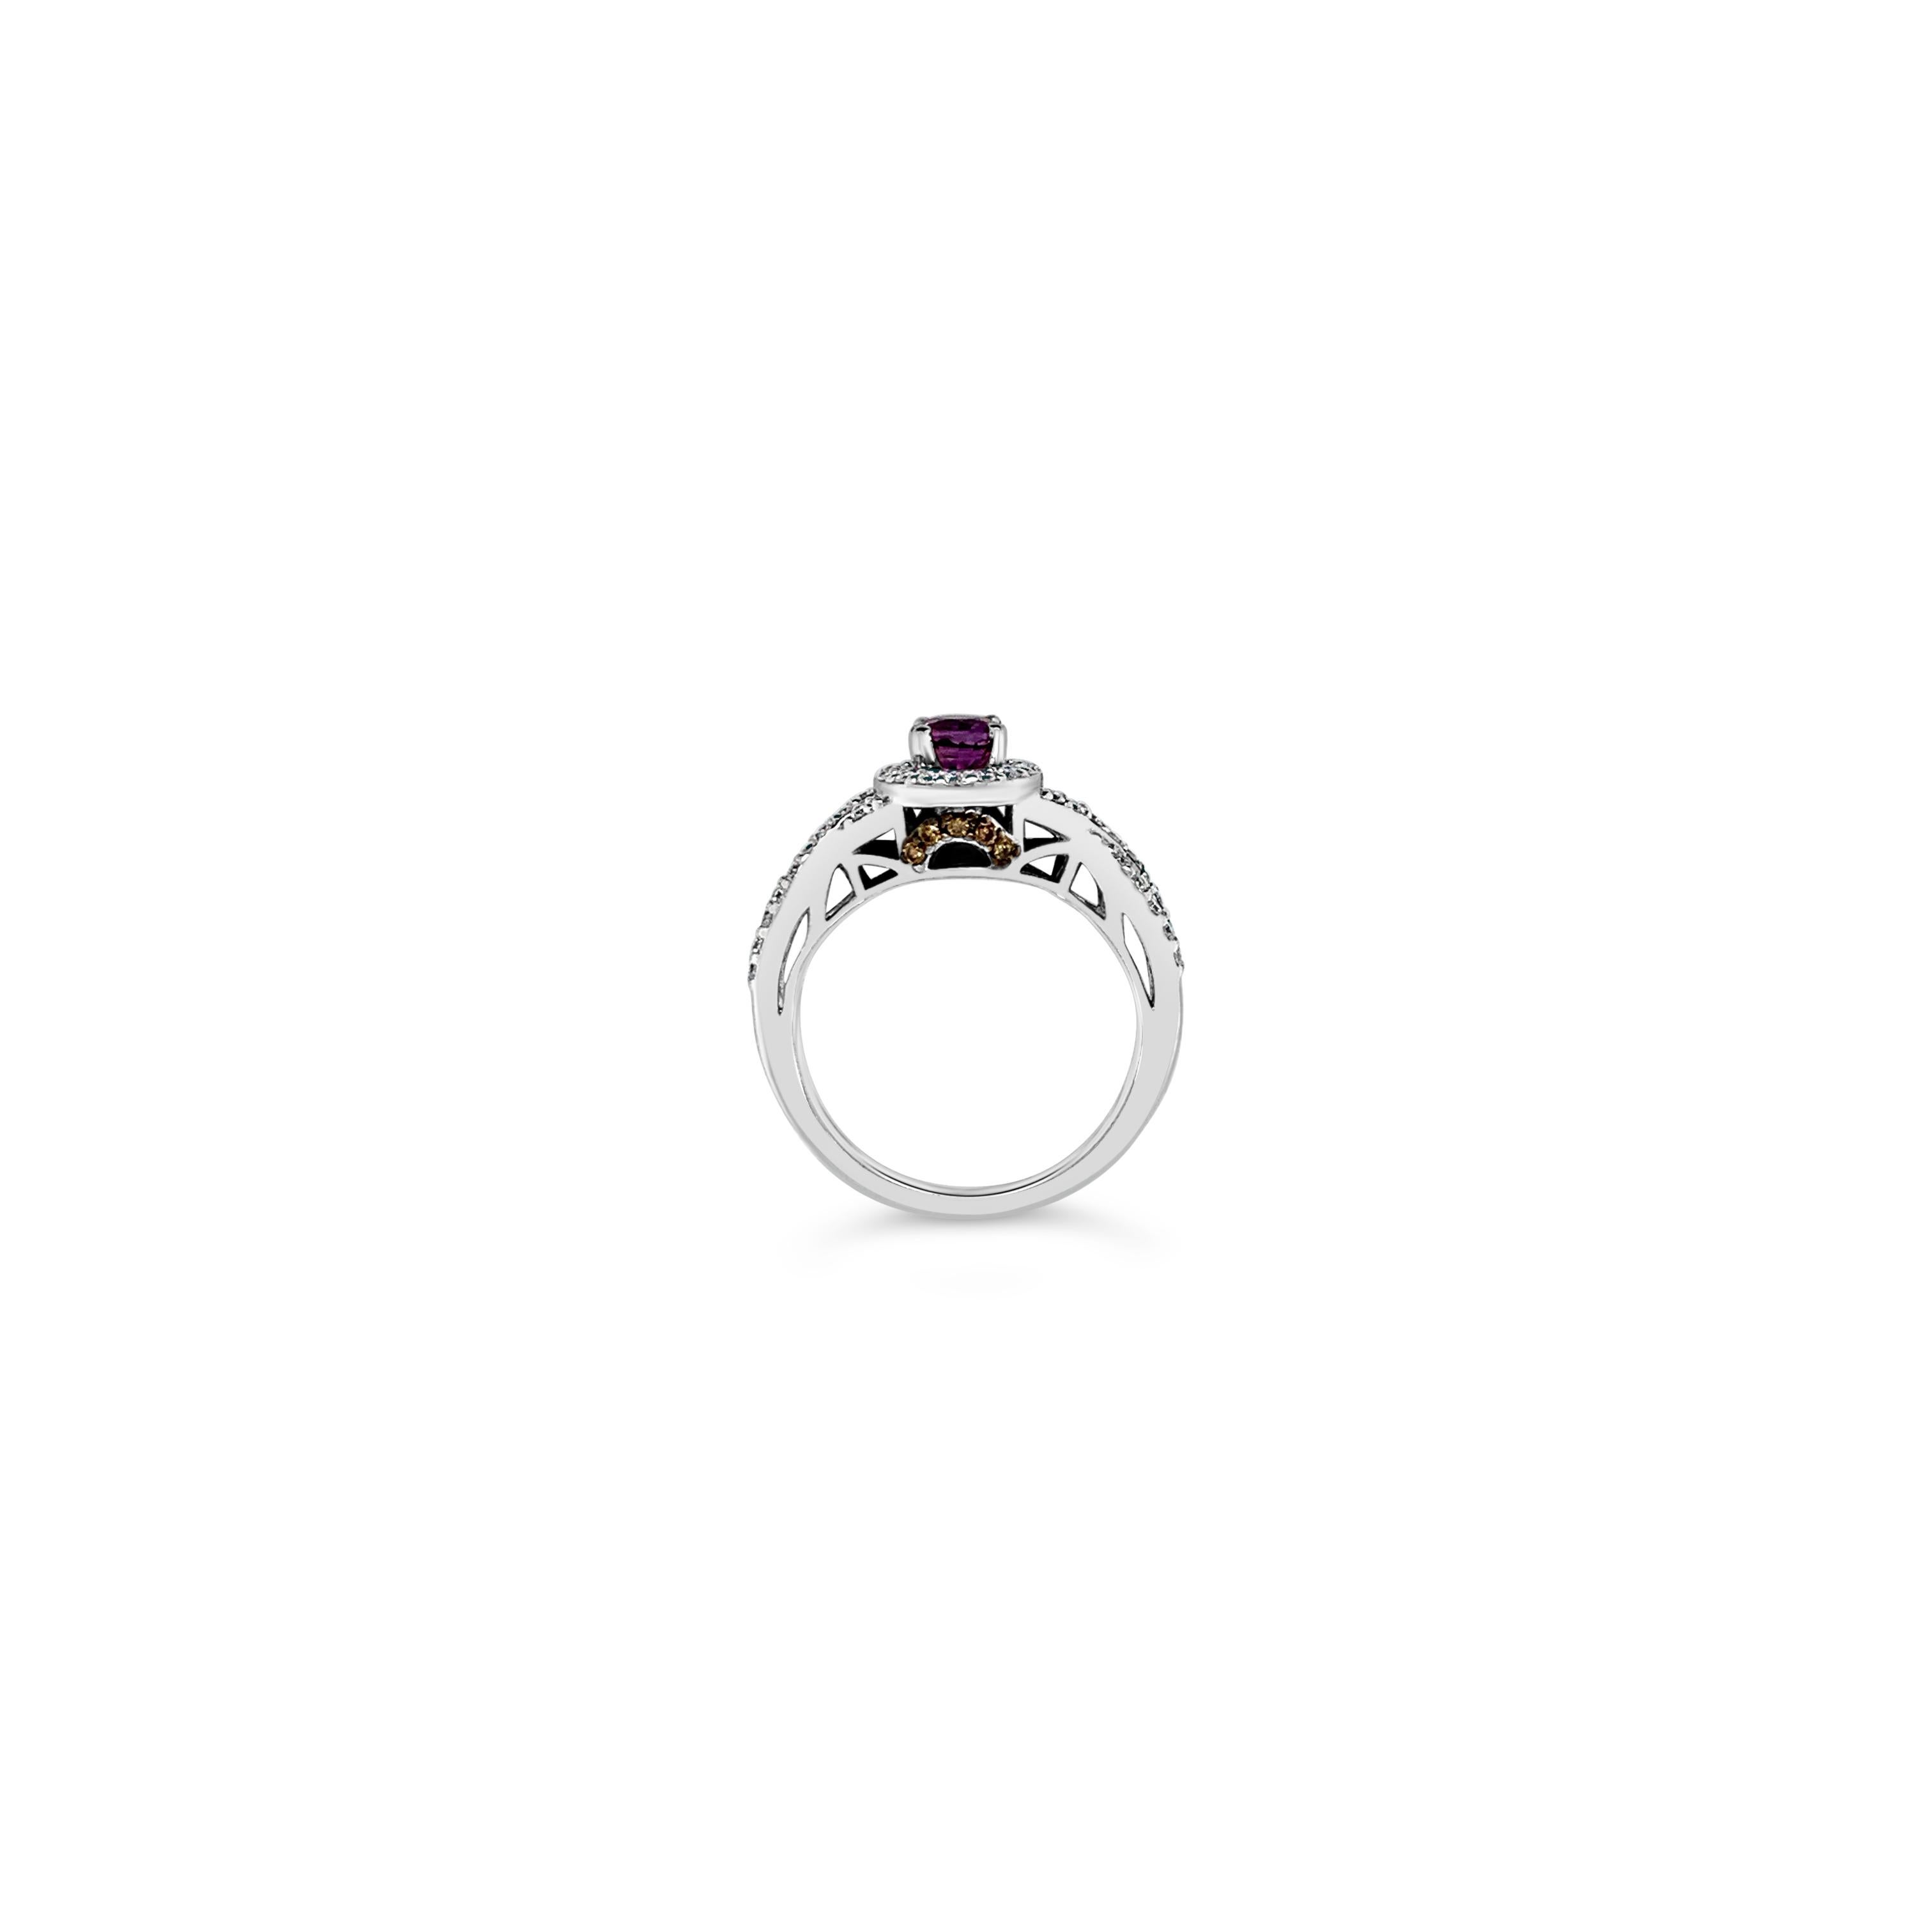 Le Vian Bridal® Ring featuring 0.62 cts. Purple Sapphire, 0.07 cts. Chocolate Diamonds® , 0.32 cts. Vanilla Diamonds®  set in 14K Vanilla Gold®

Ring size 6

A Perfect Gift – Looking for a birthday or Mother’s Day gift idea for your mom, daughter,